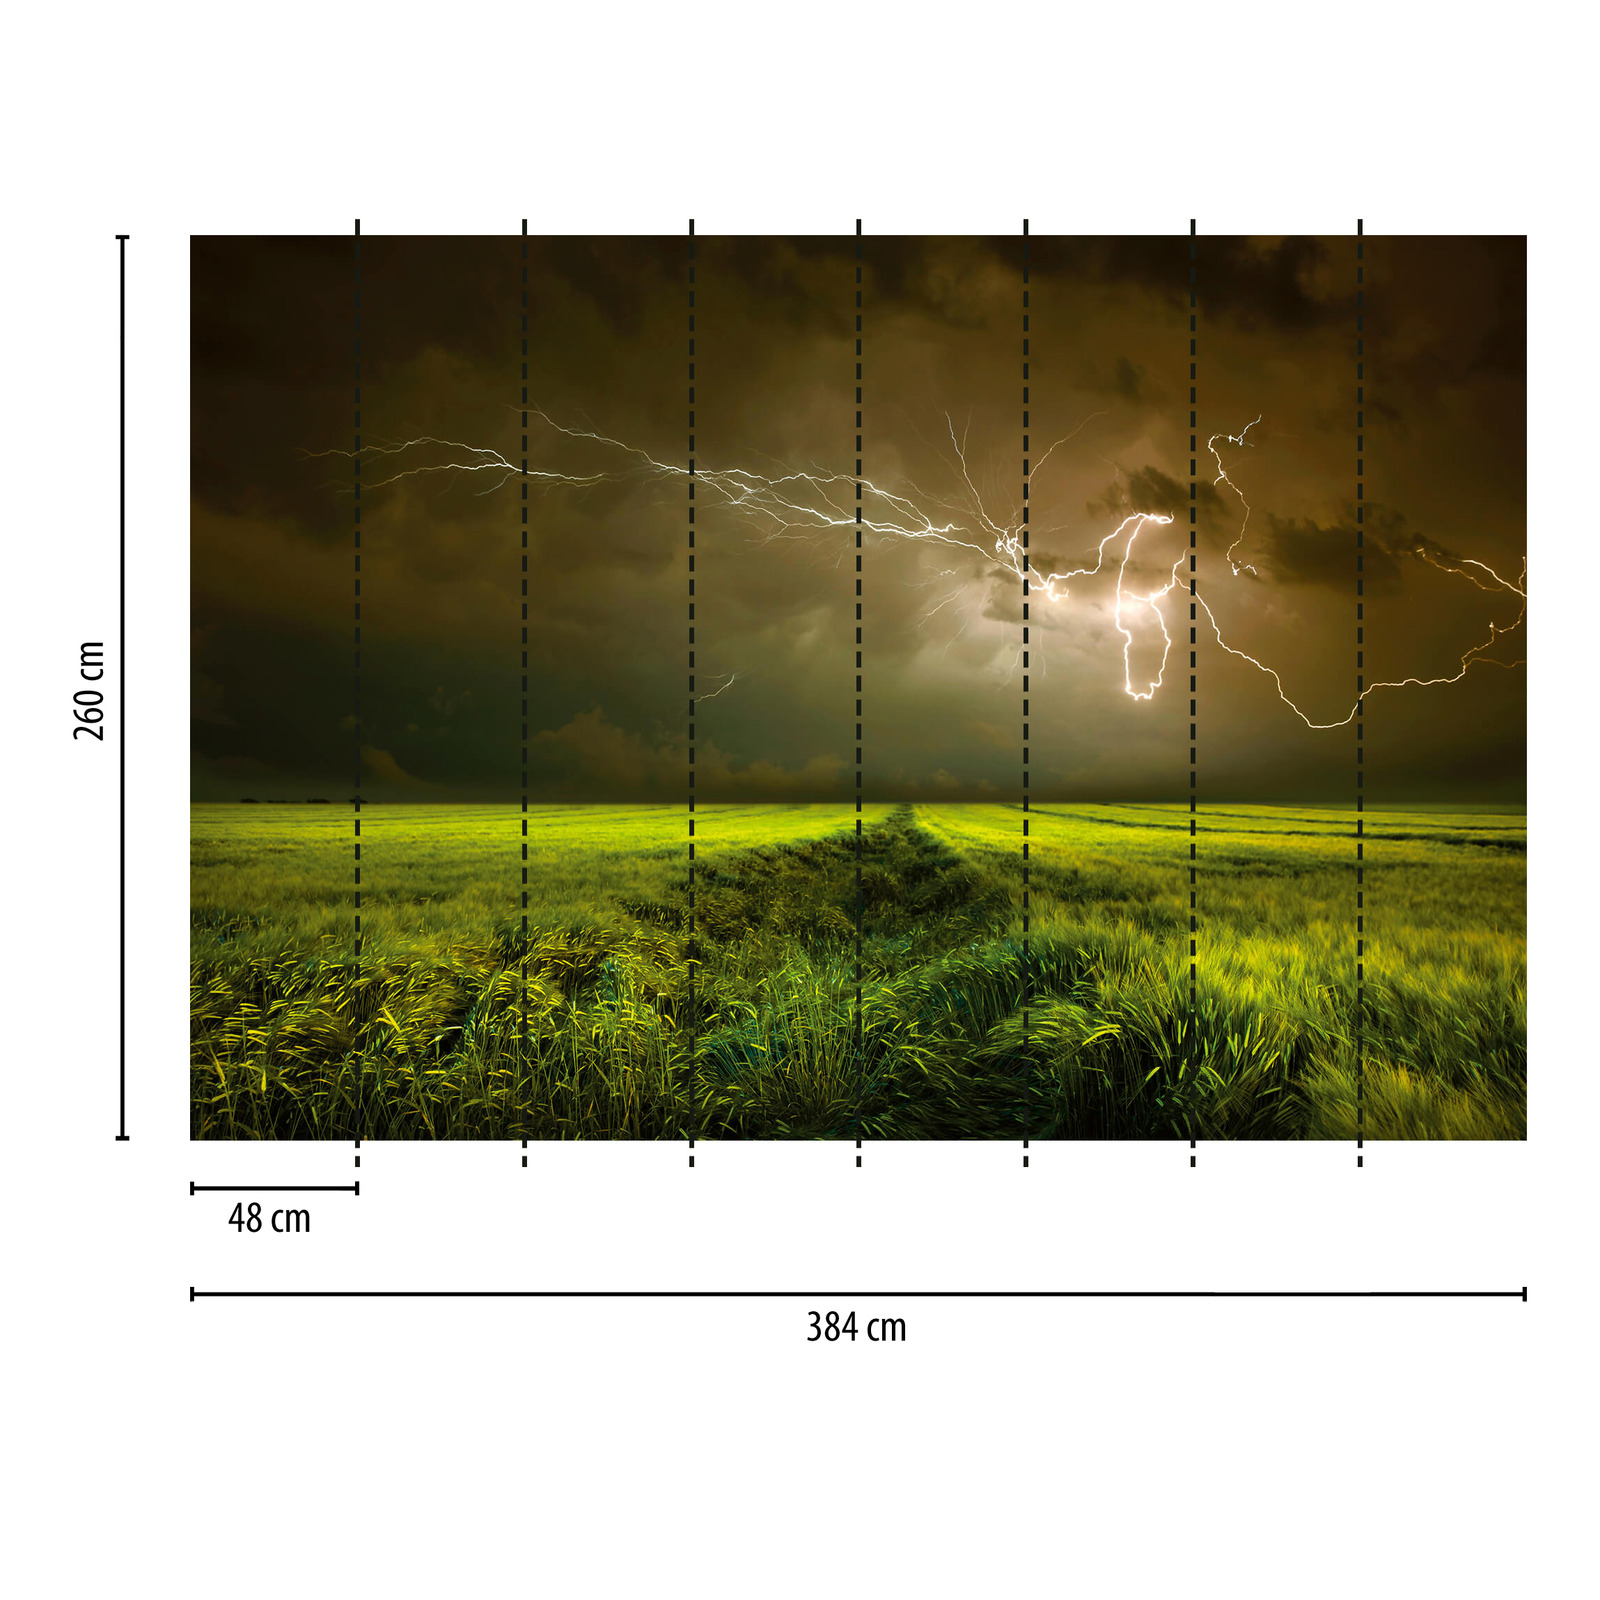             Photo wallpaper Field in storm with lightning - Green, Brown
        